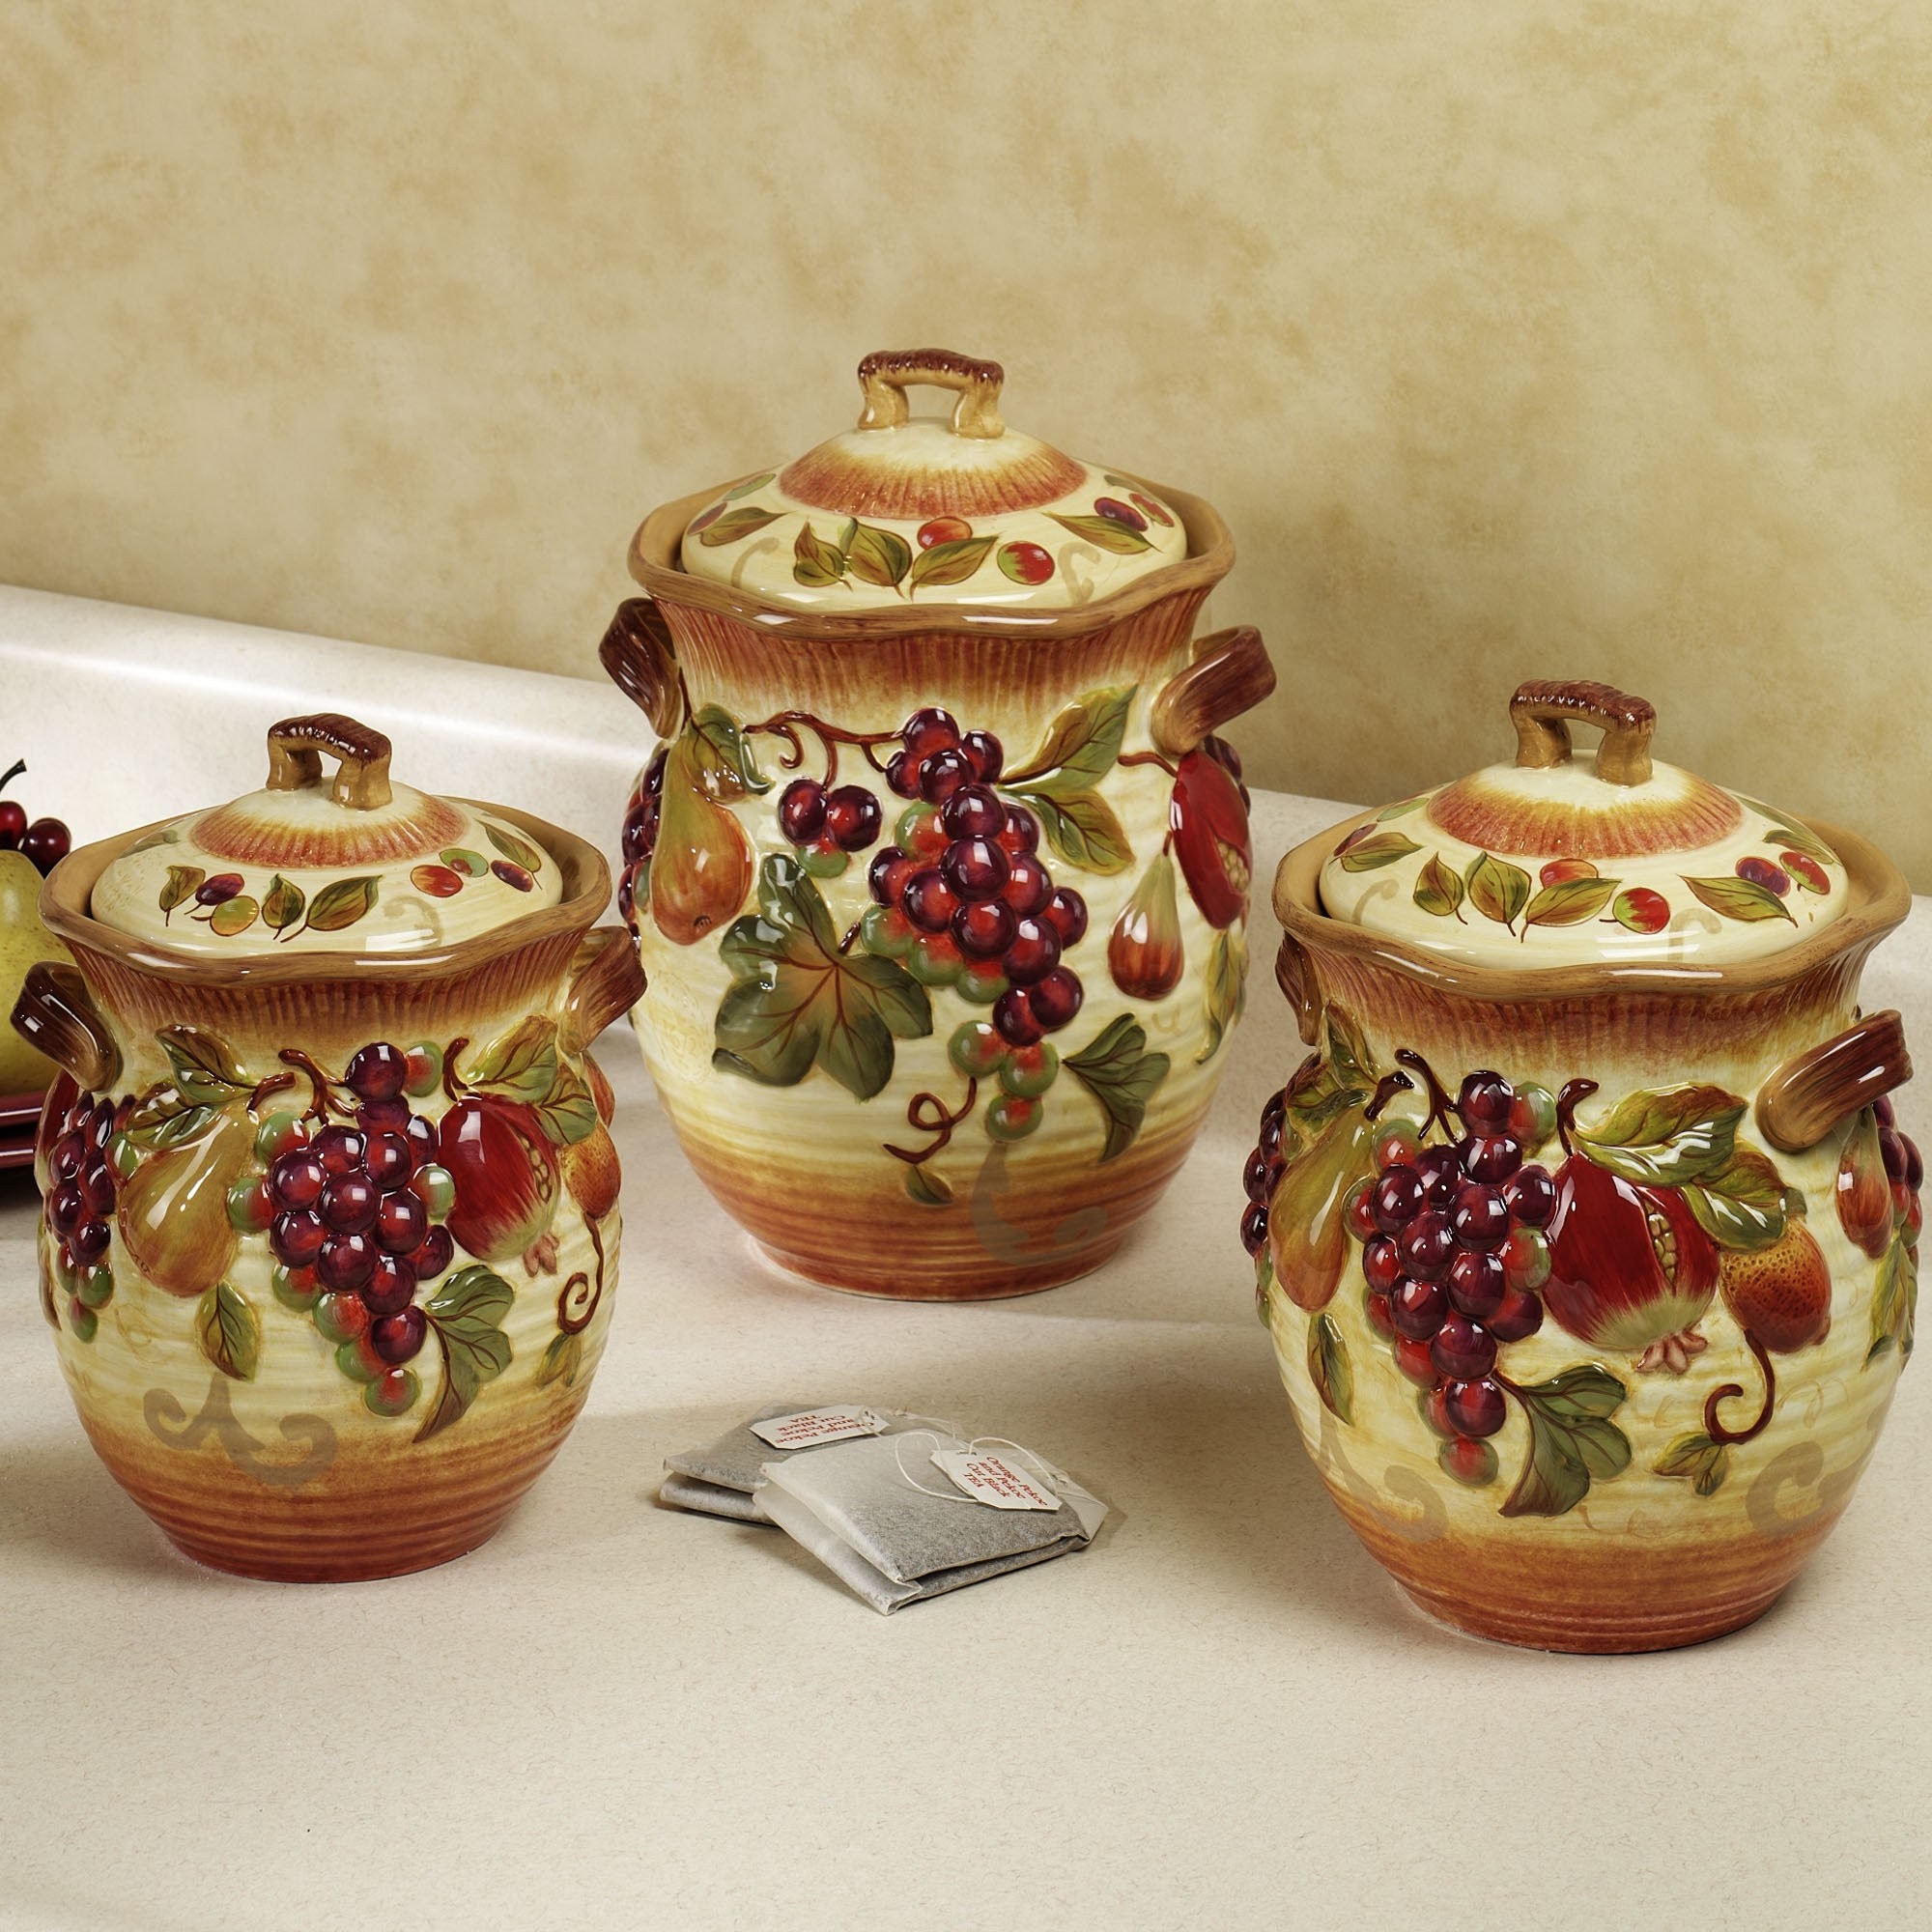 Ceramic canisters sets for the kitchen